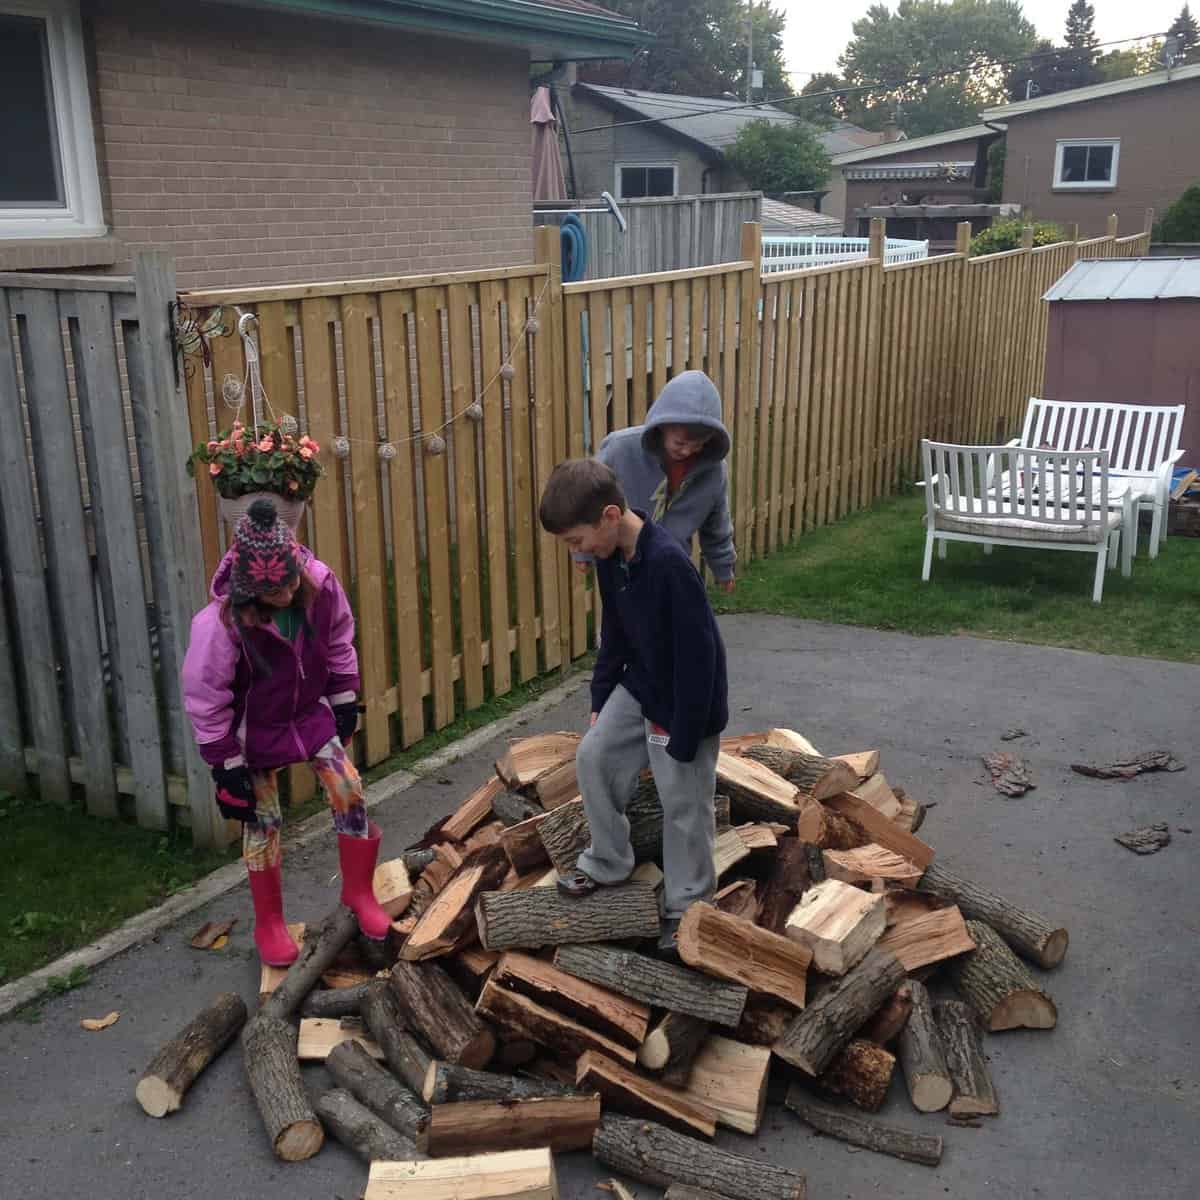 3 kids climbing on a pile of firewood in the driveway